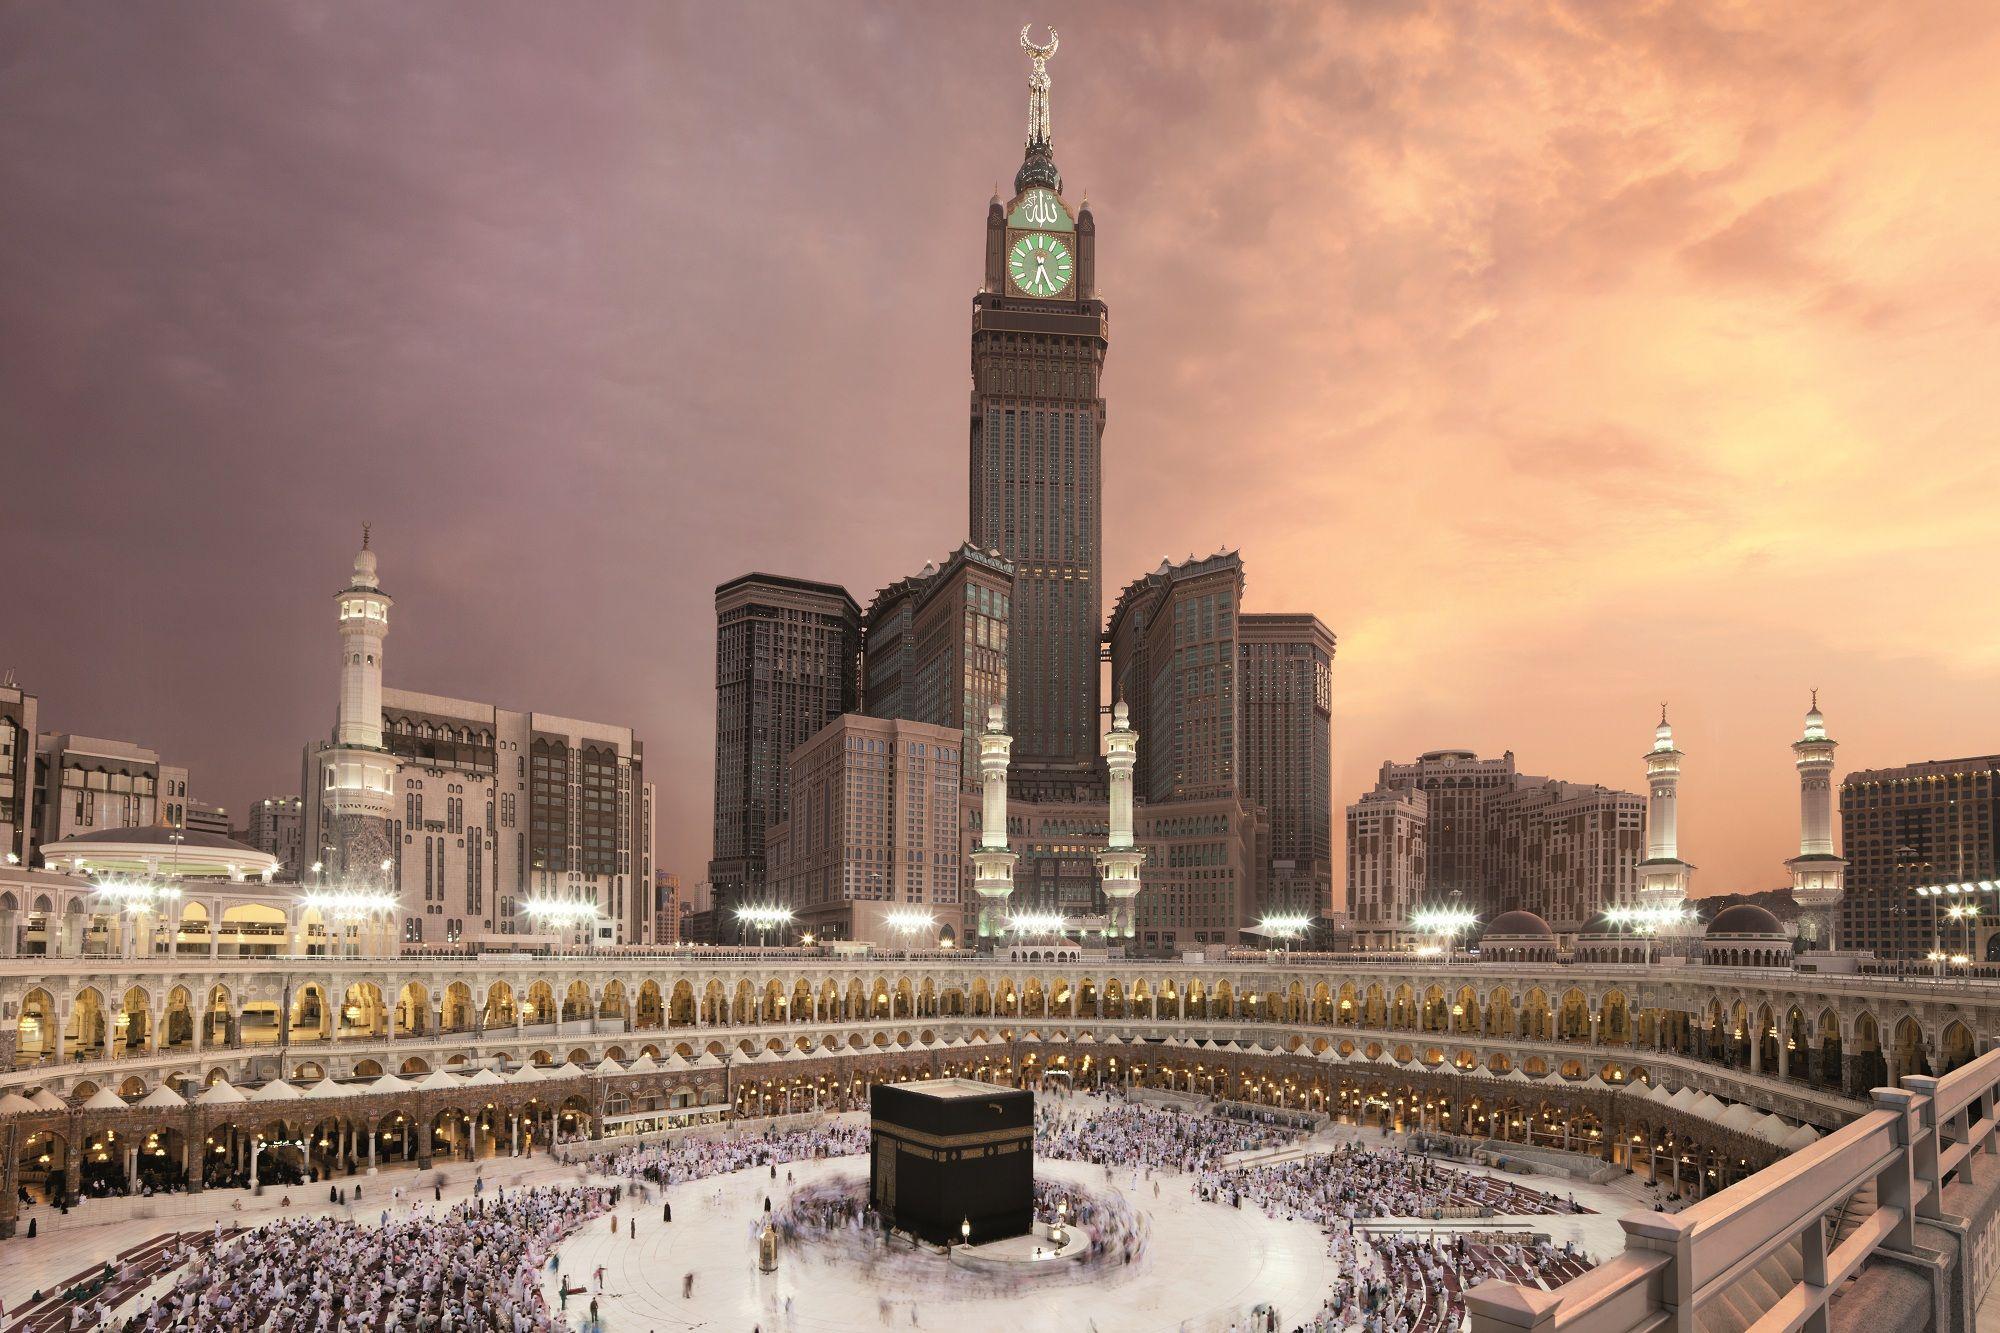 Mecca wallpaper by NamiSo6  Download on ZEDGE  f4c9